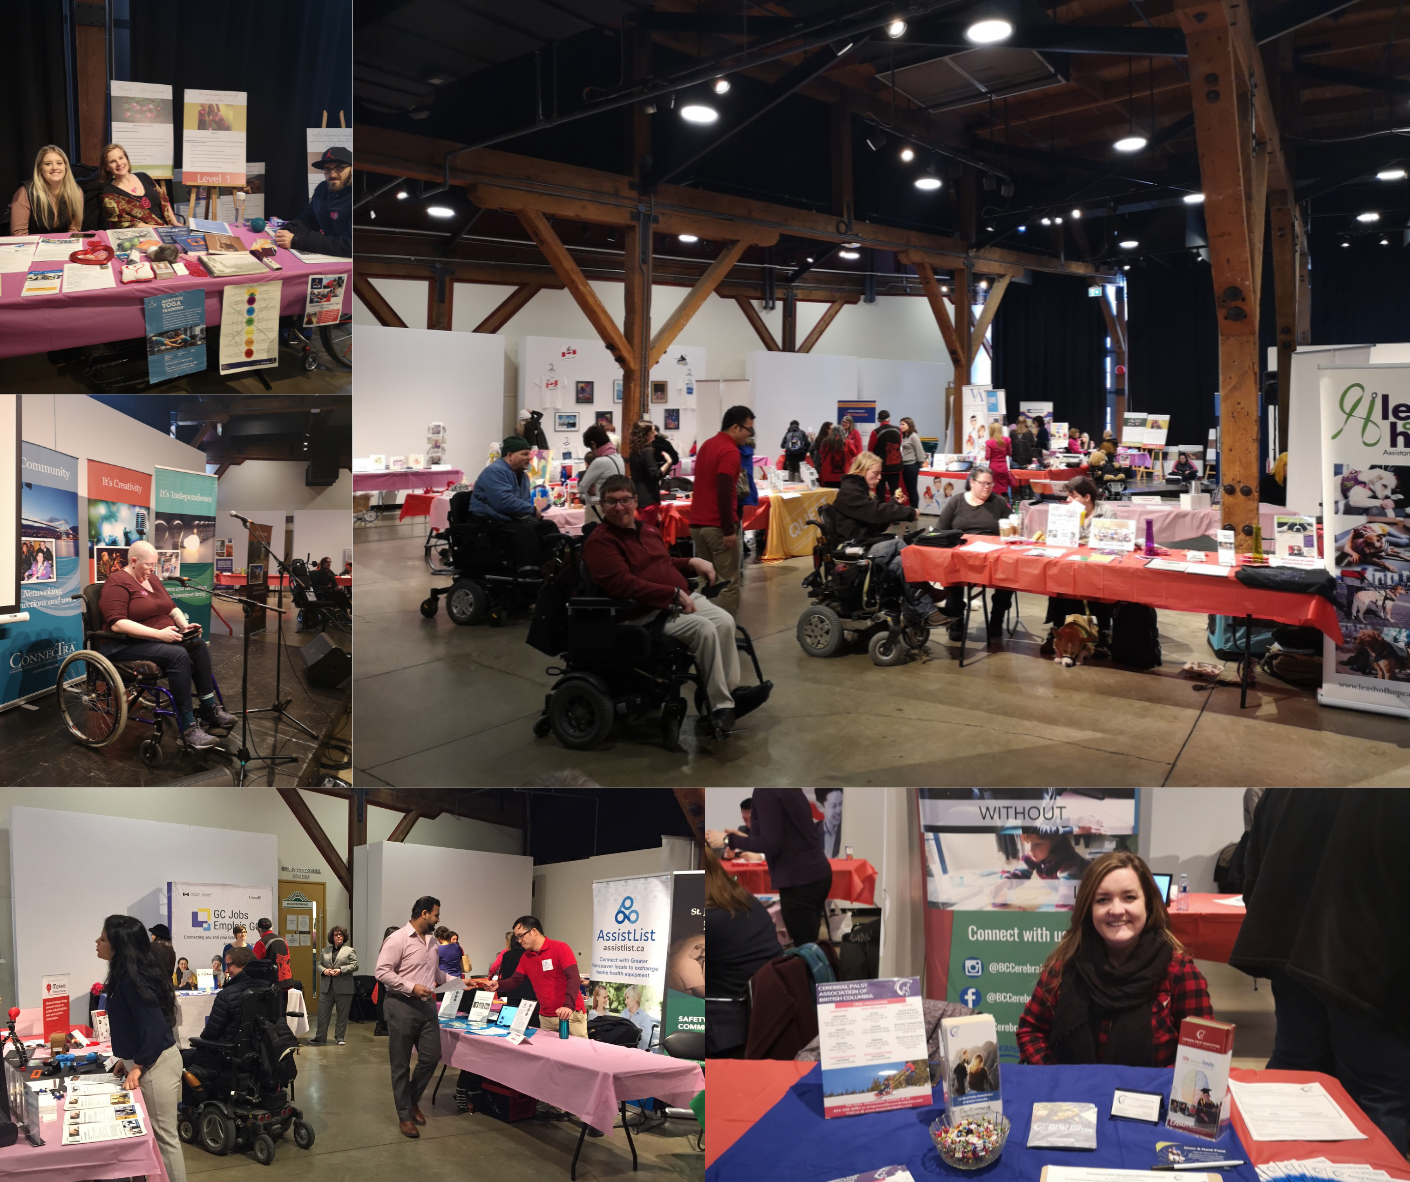 Collage of images from previous years' Abilities Expo. Smiling attendees and organizations are interacting at the Roundhouse Community Centre.